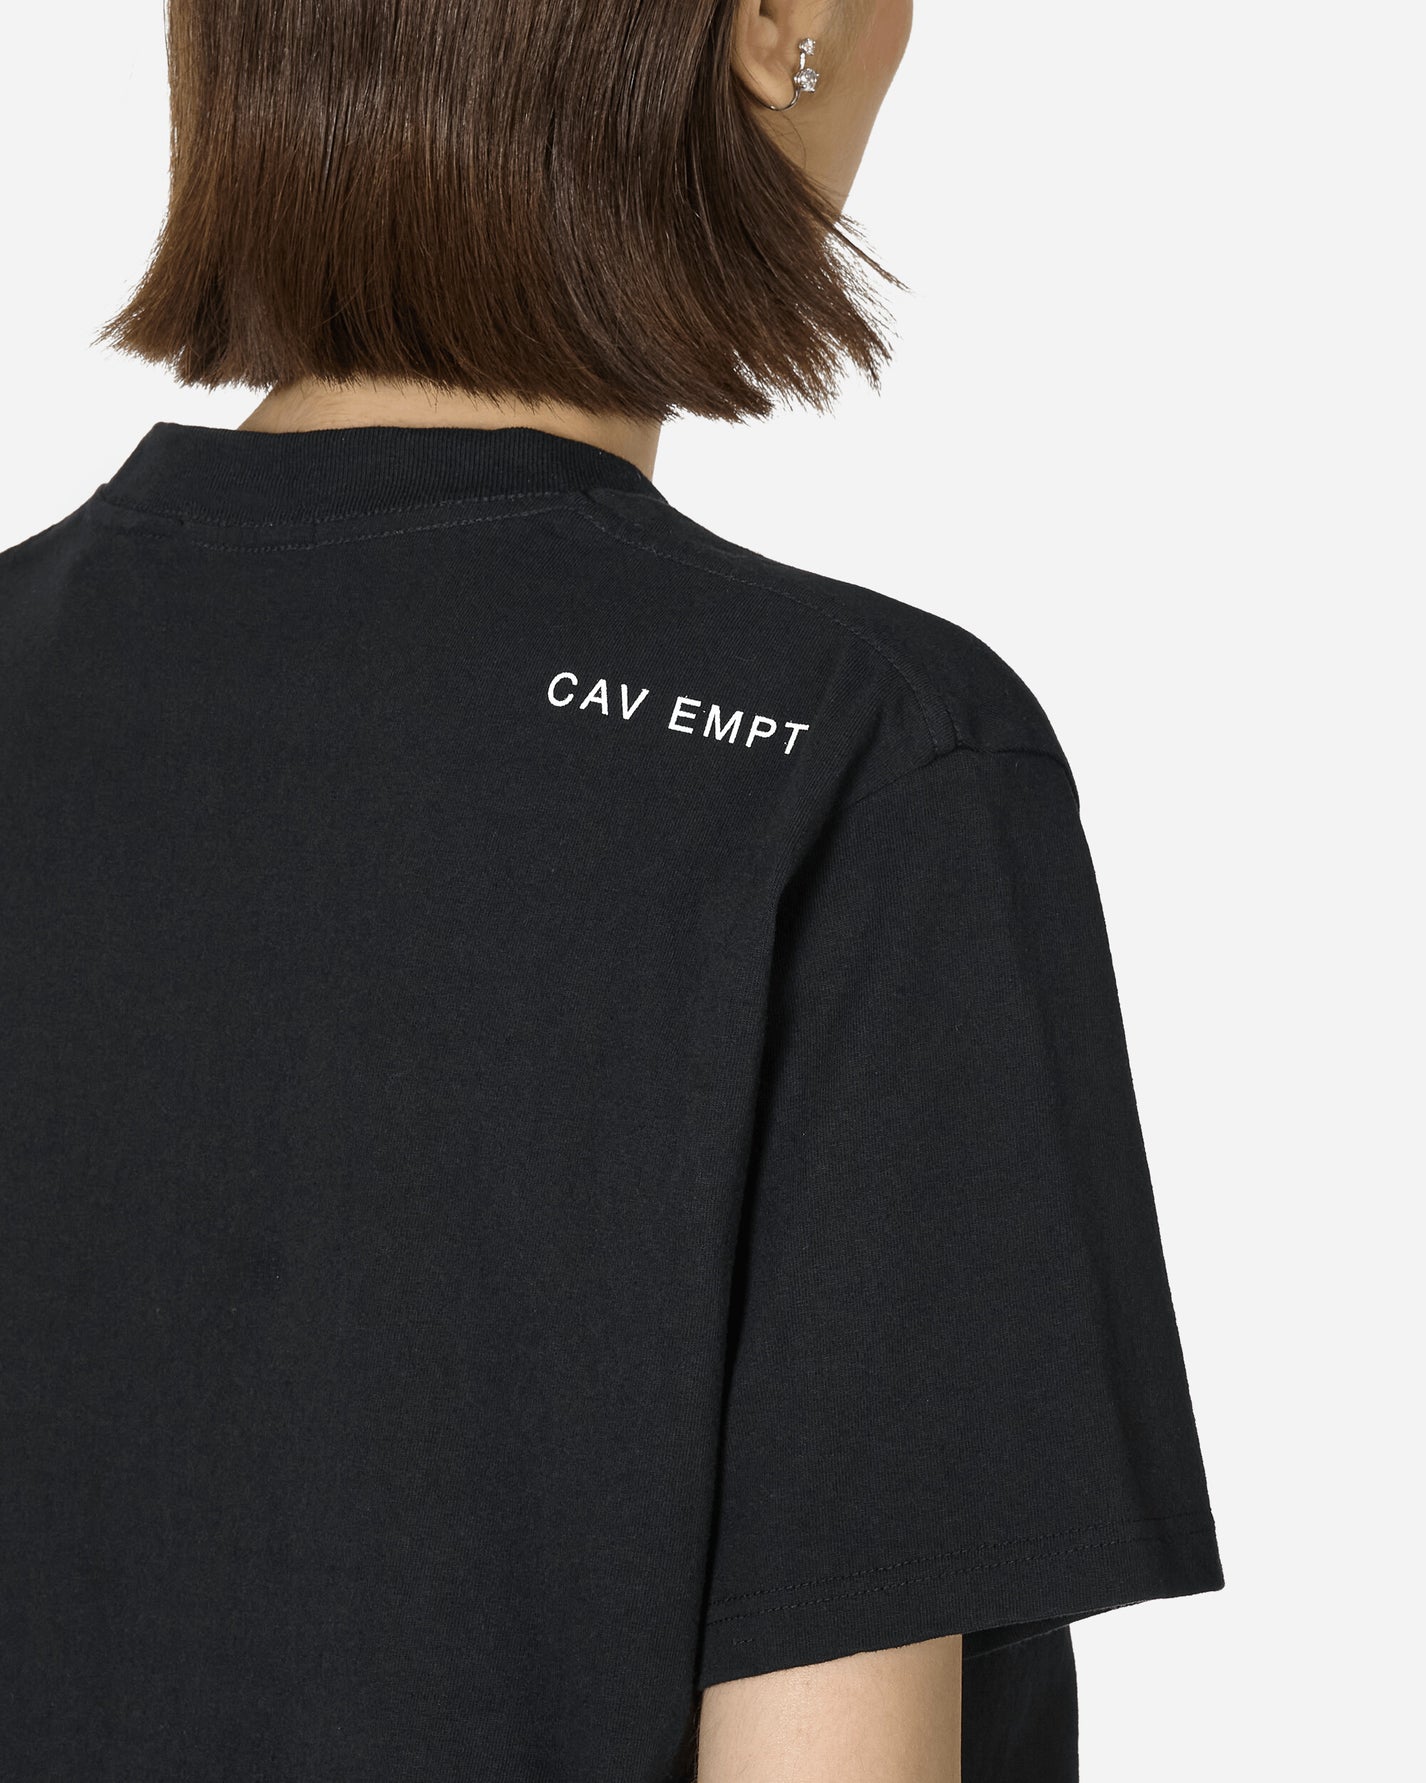 Cav Empt Md Walkabout T Black T-Shirts Shortsleeve CES25T02 BLK